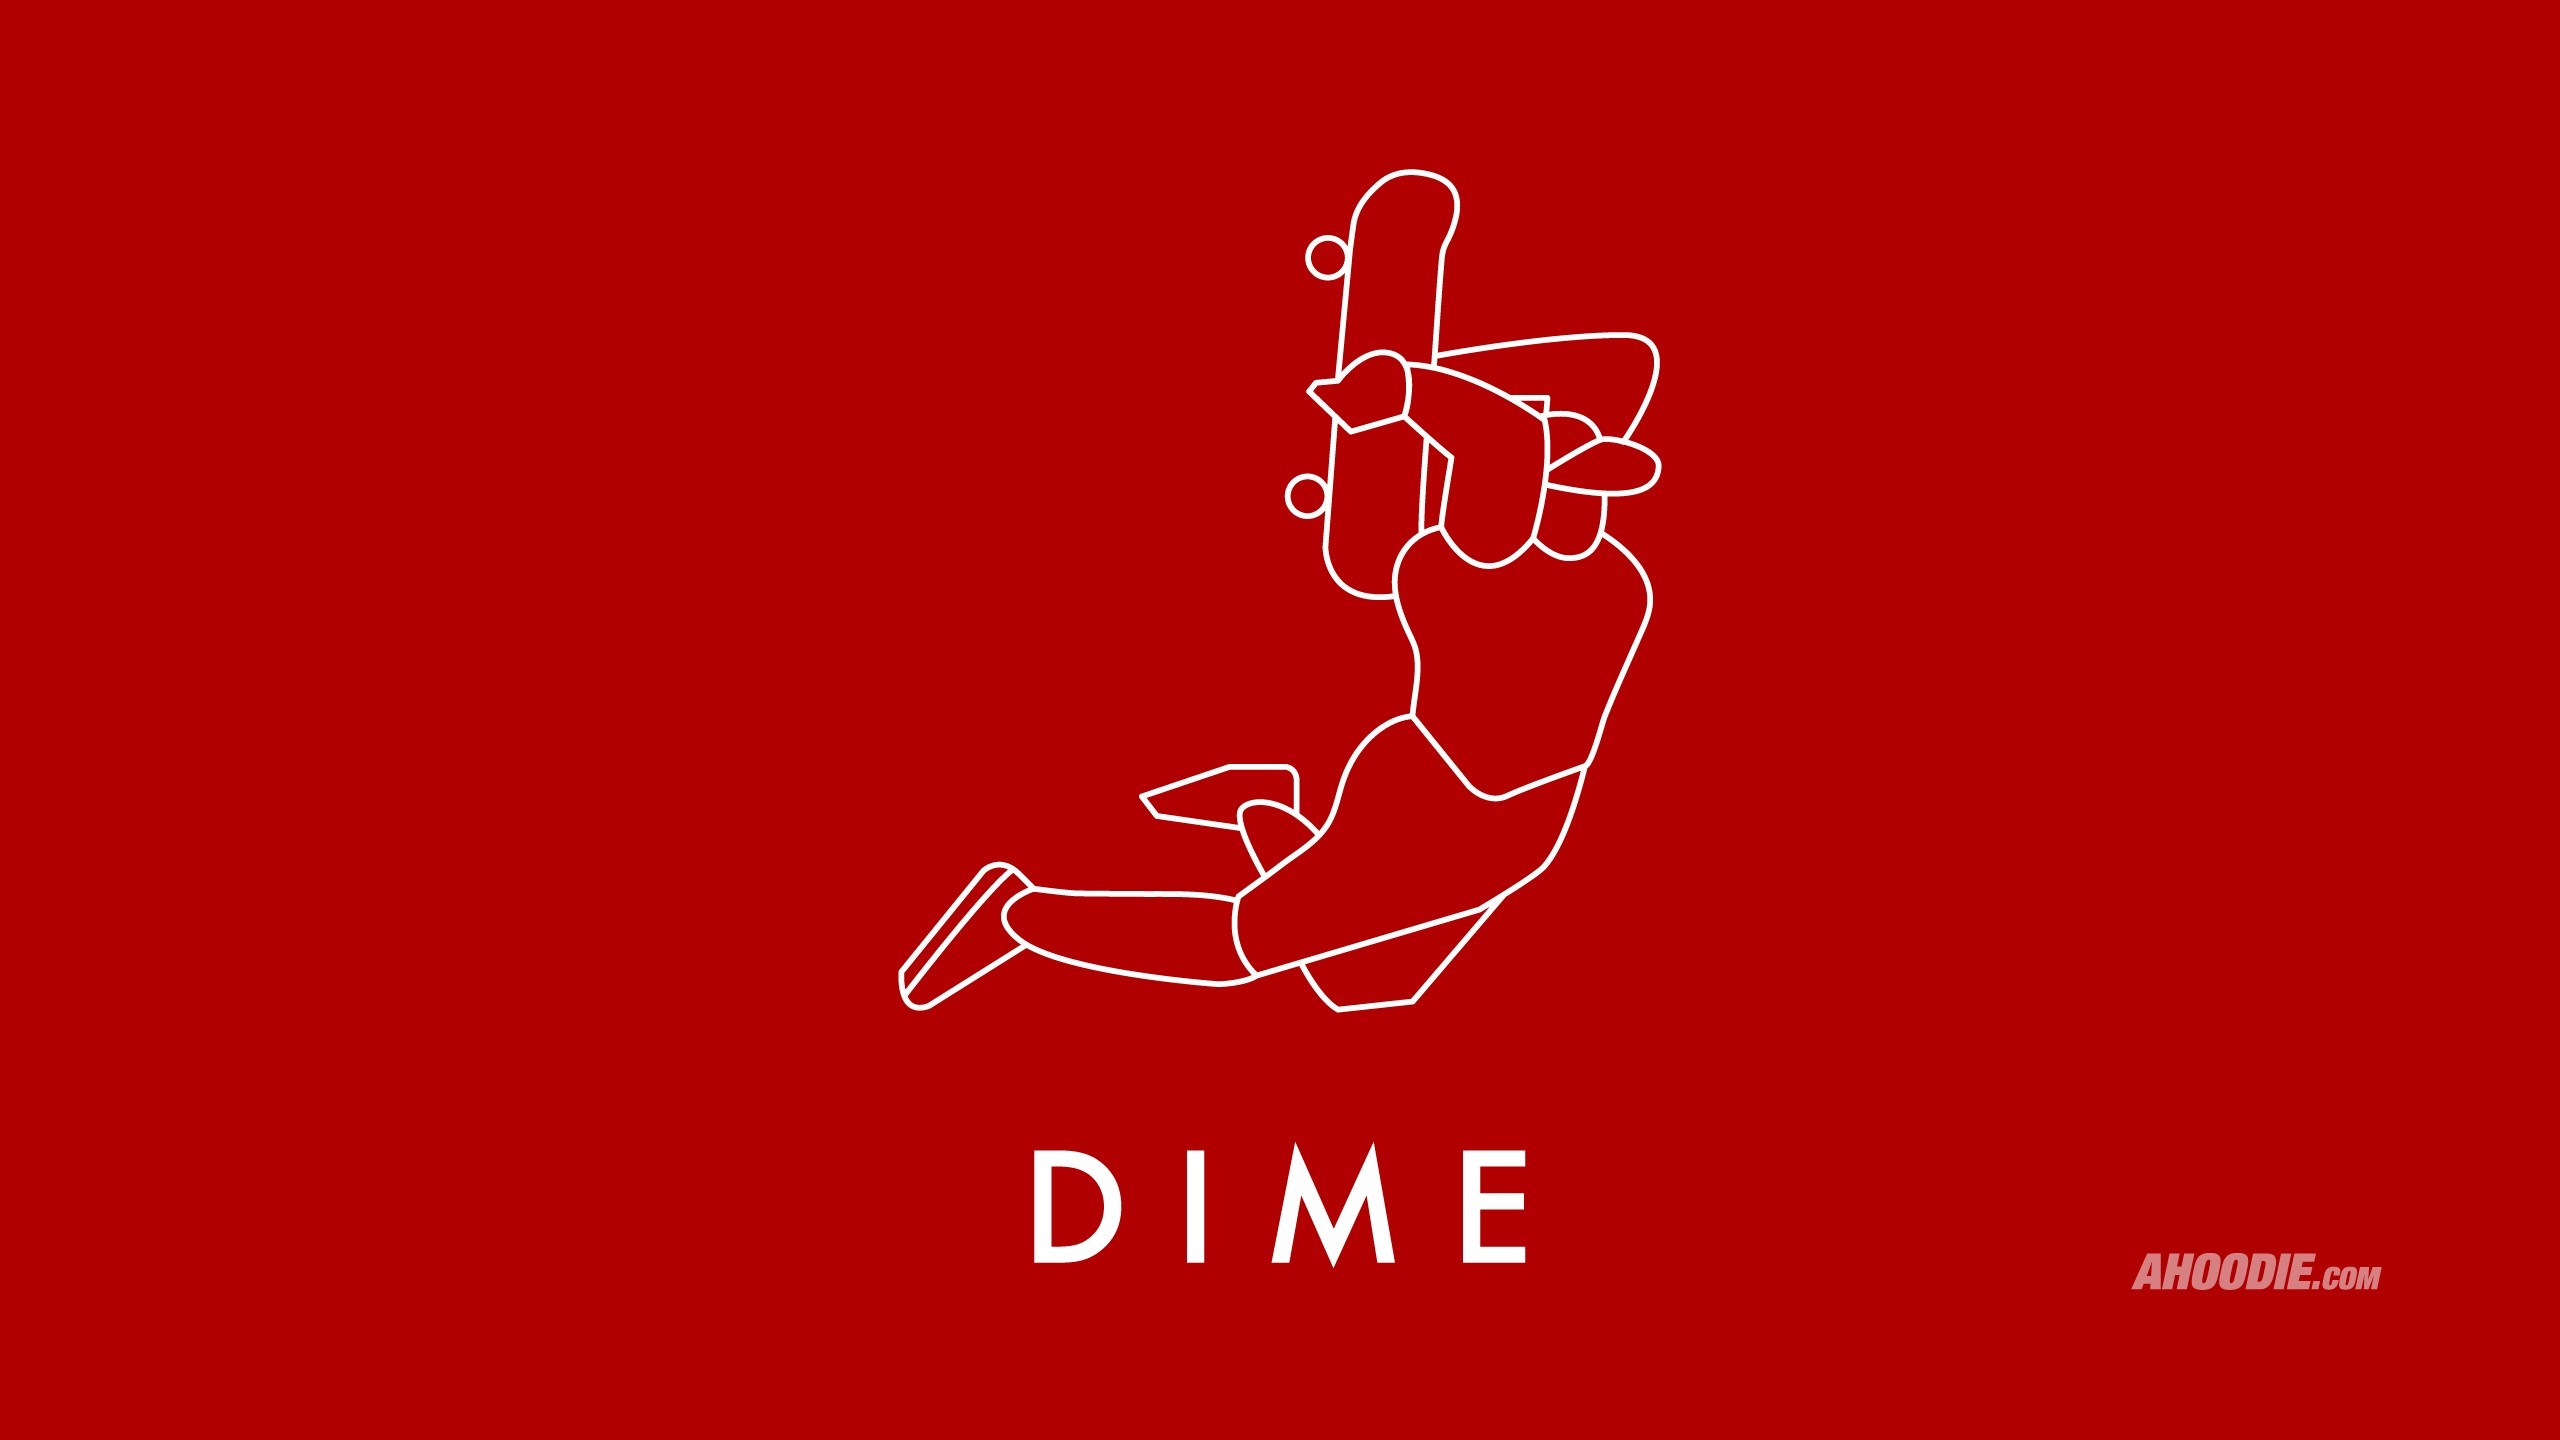 2560x1440 ... Wallpapers Dime "Dunk" Wallpapers